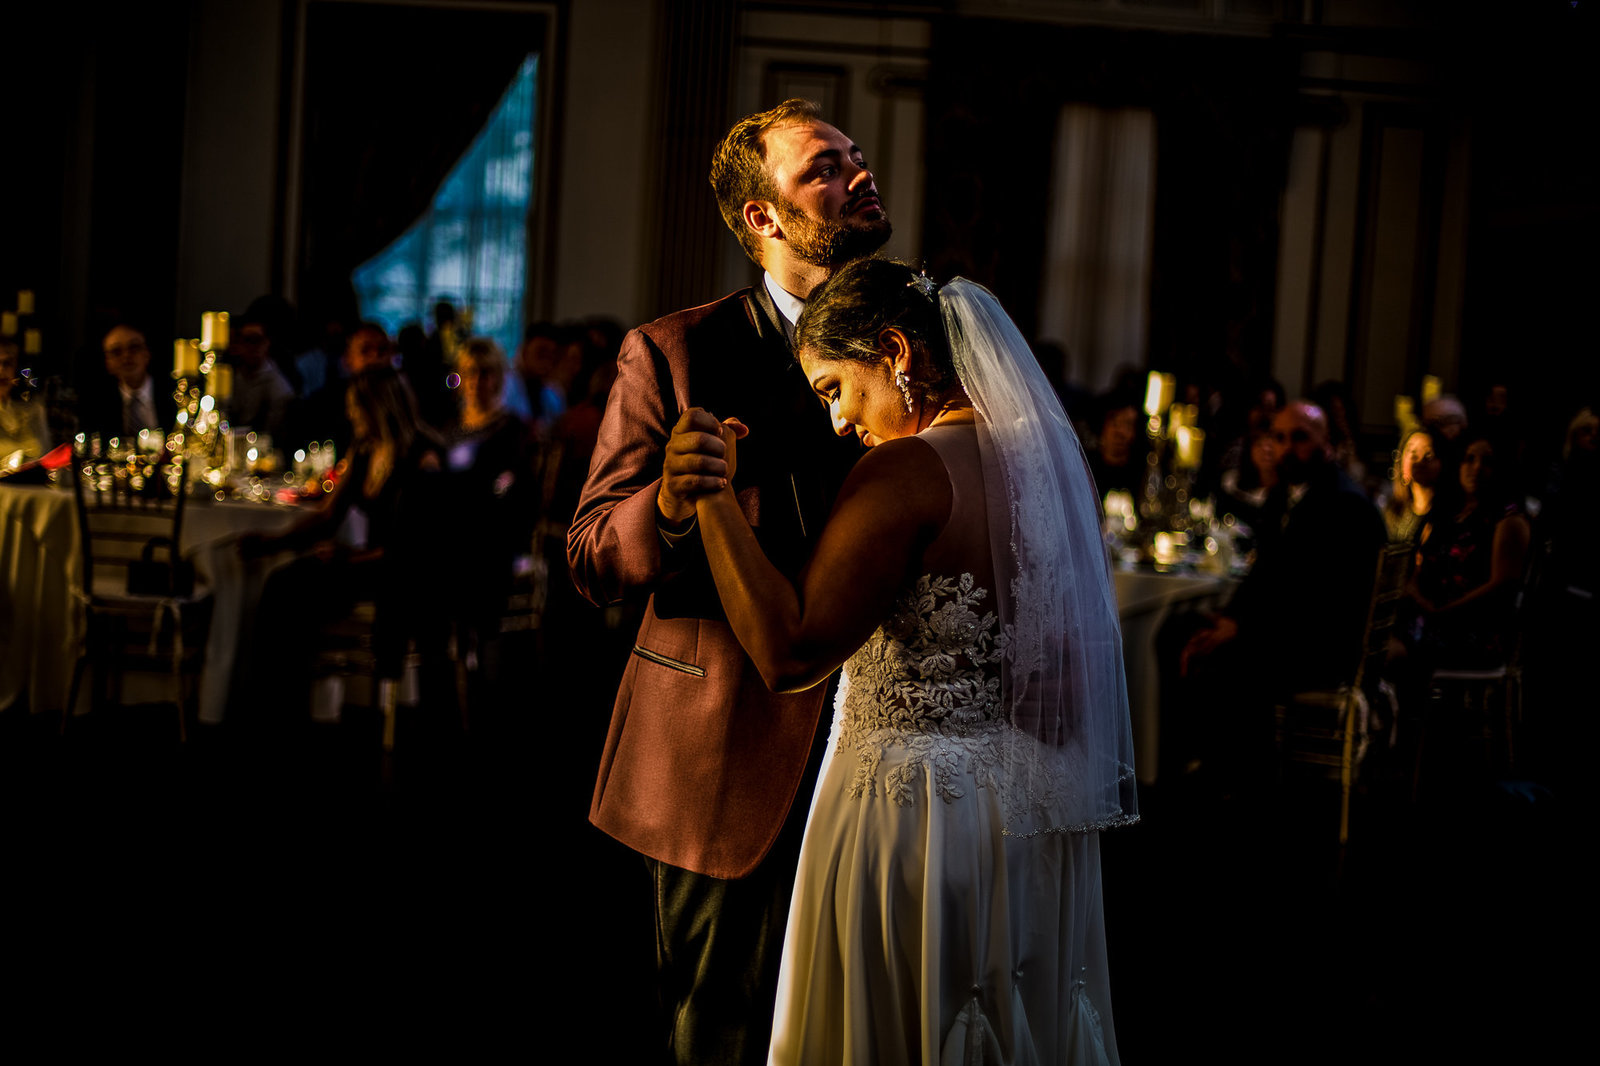 Bride and groom dance while framed in light of setting sun at the George Washington Hotel